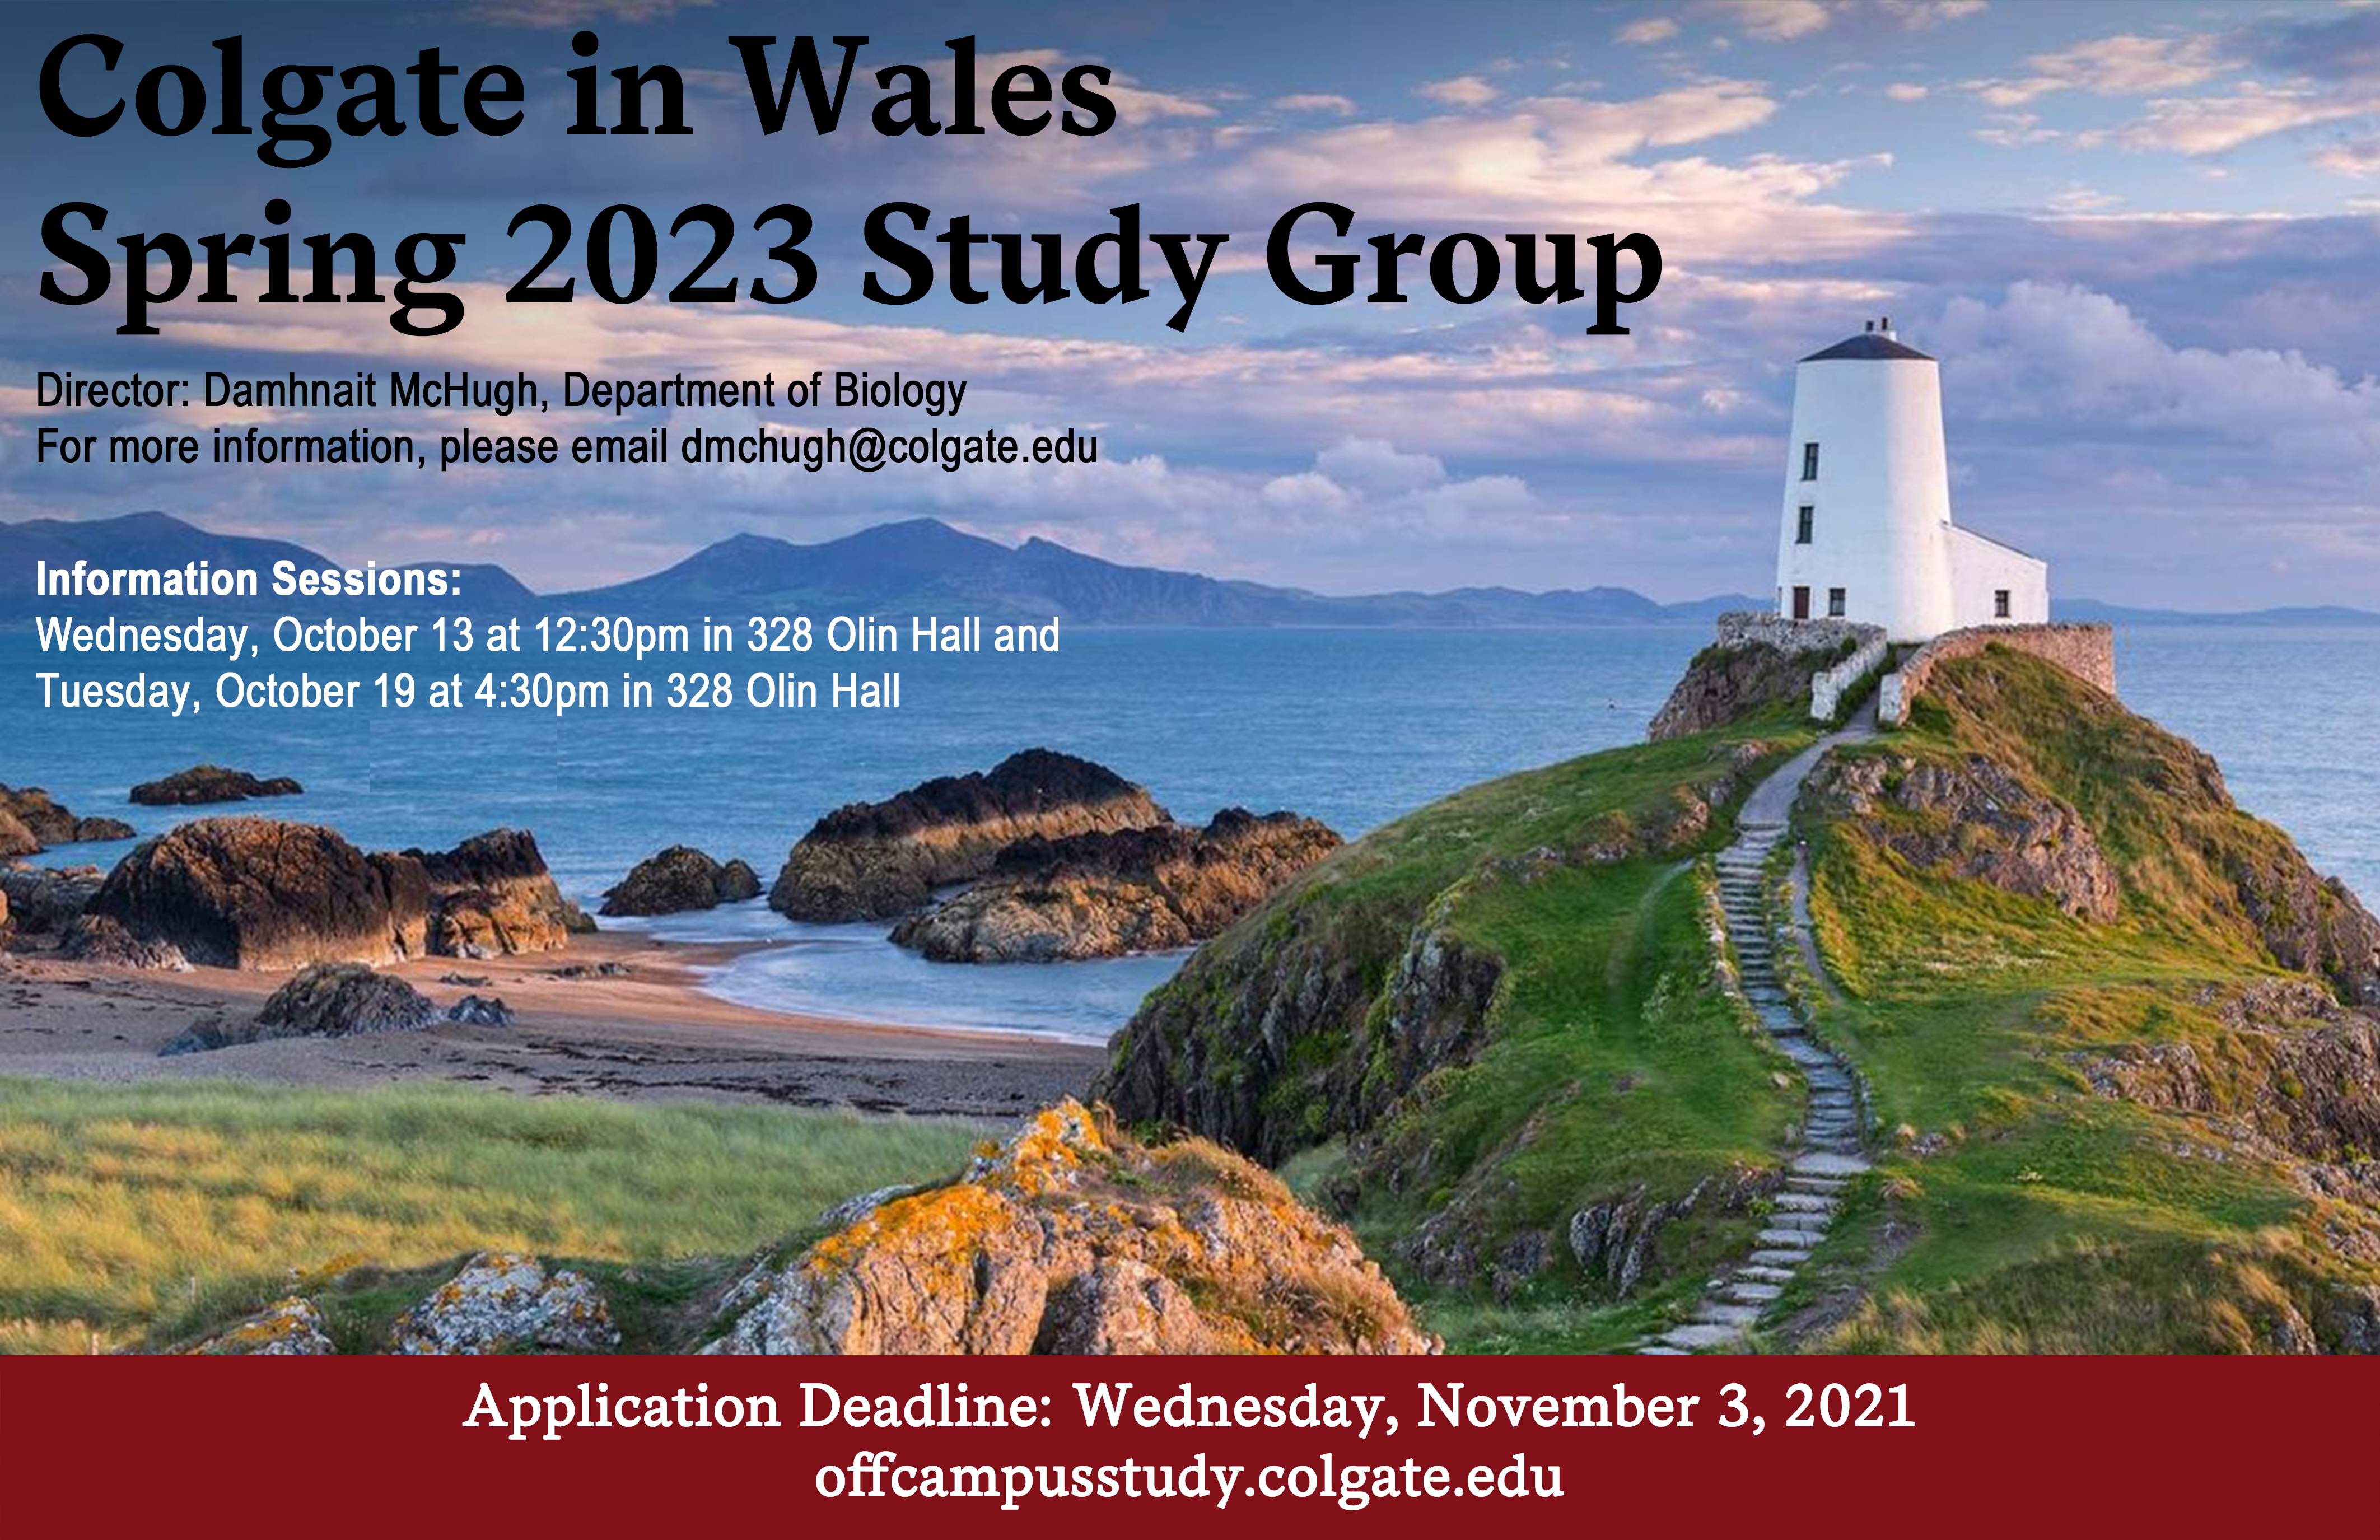 Spring 2023 Wales Study Group Poster